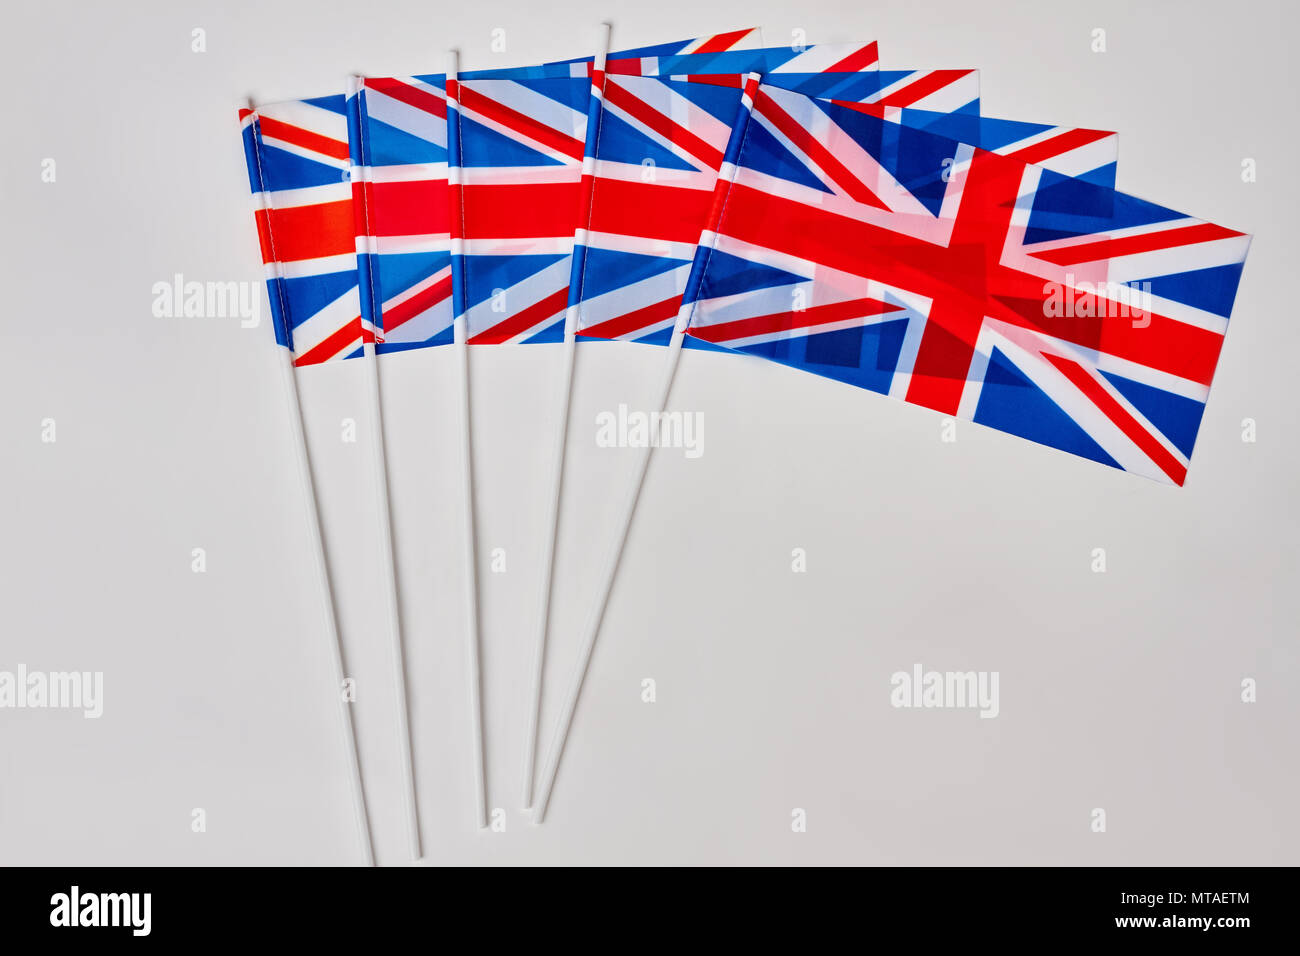 Gathering of british flags. Many Britain flags on white isolated background. Stock Photo